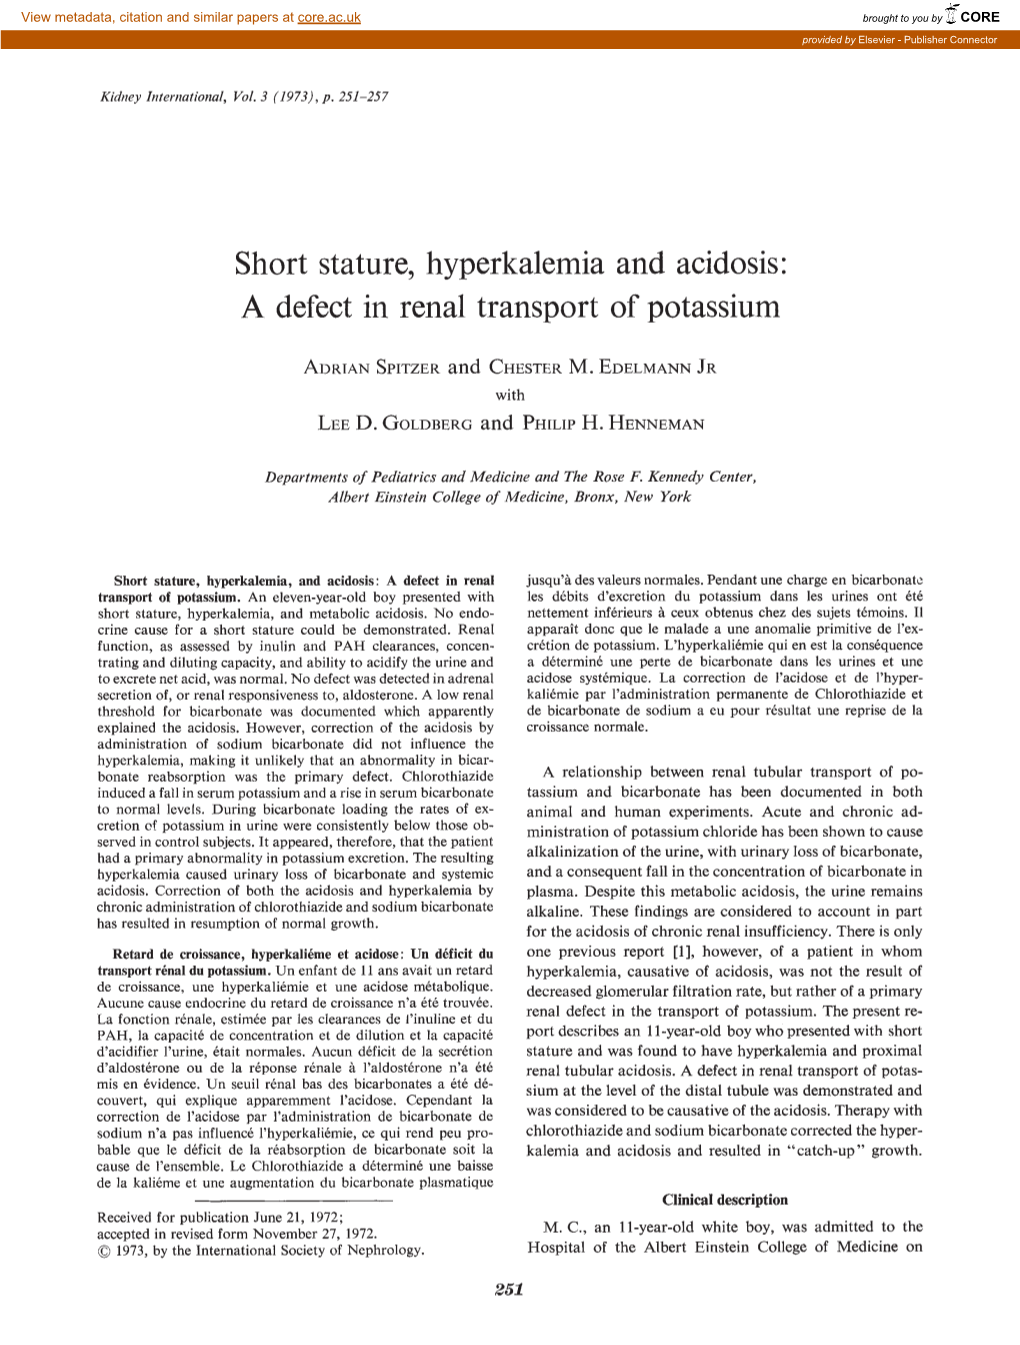 Short Stature, Hyperkalemia and Acidosis: a Defect in Renal Transport of Potassium